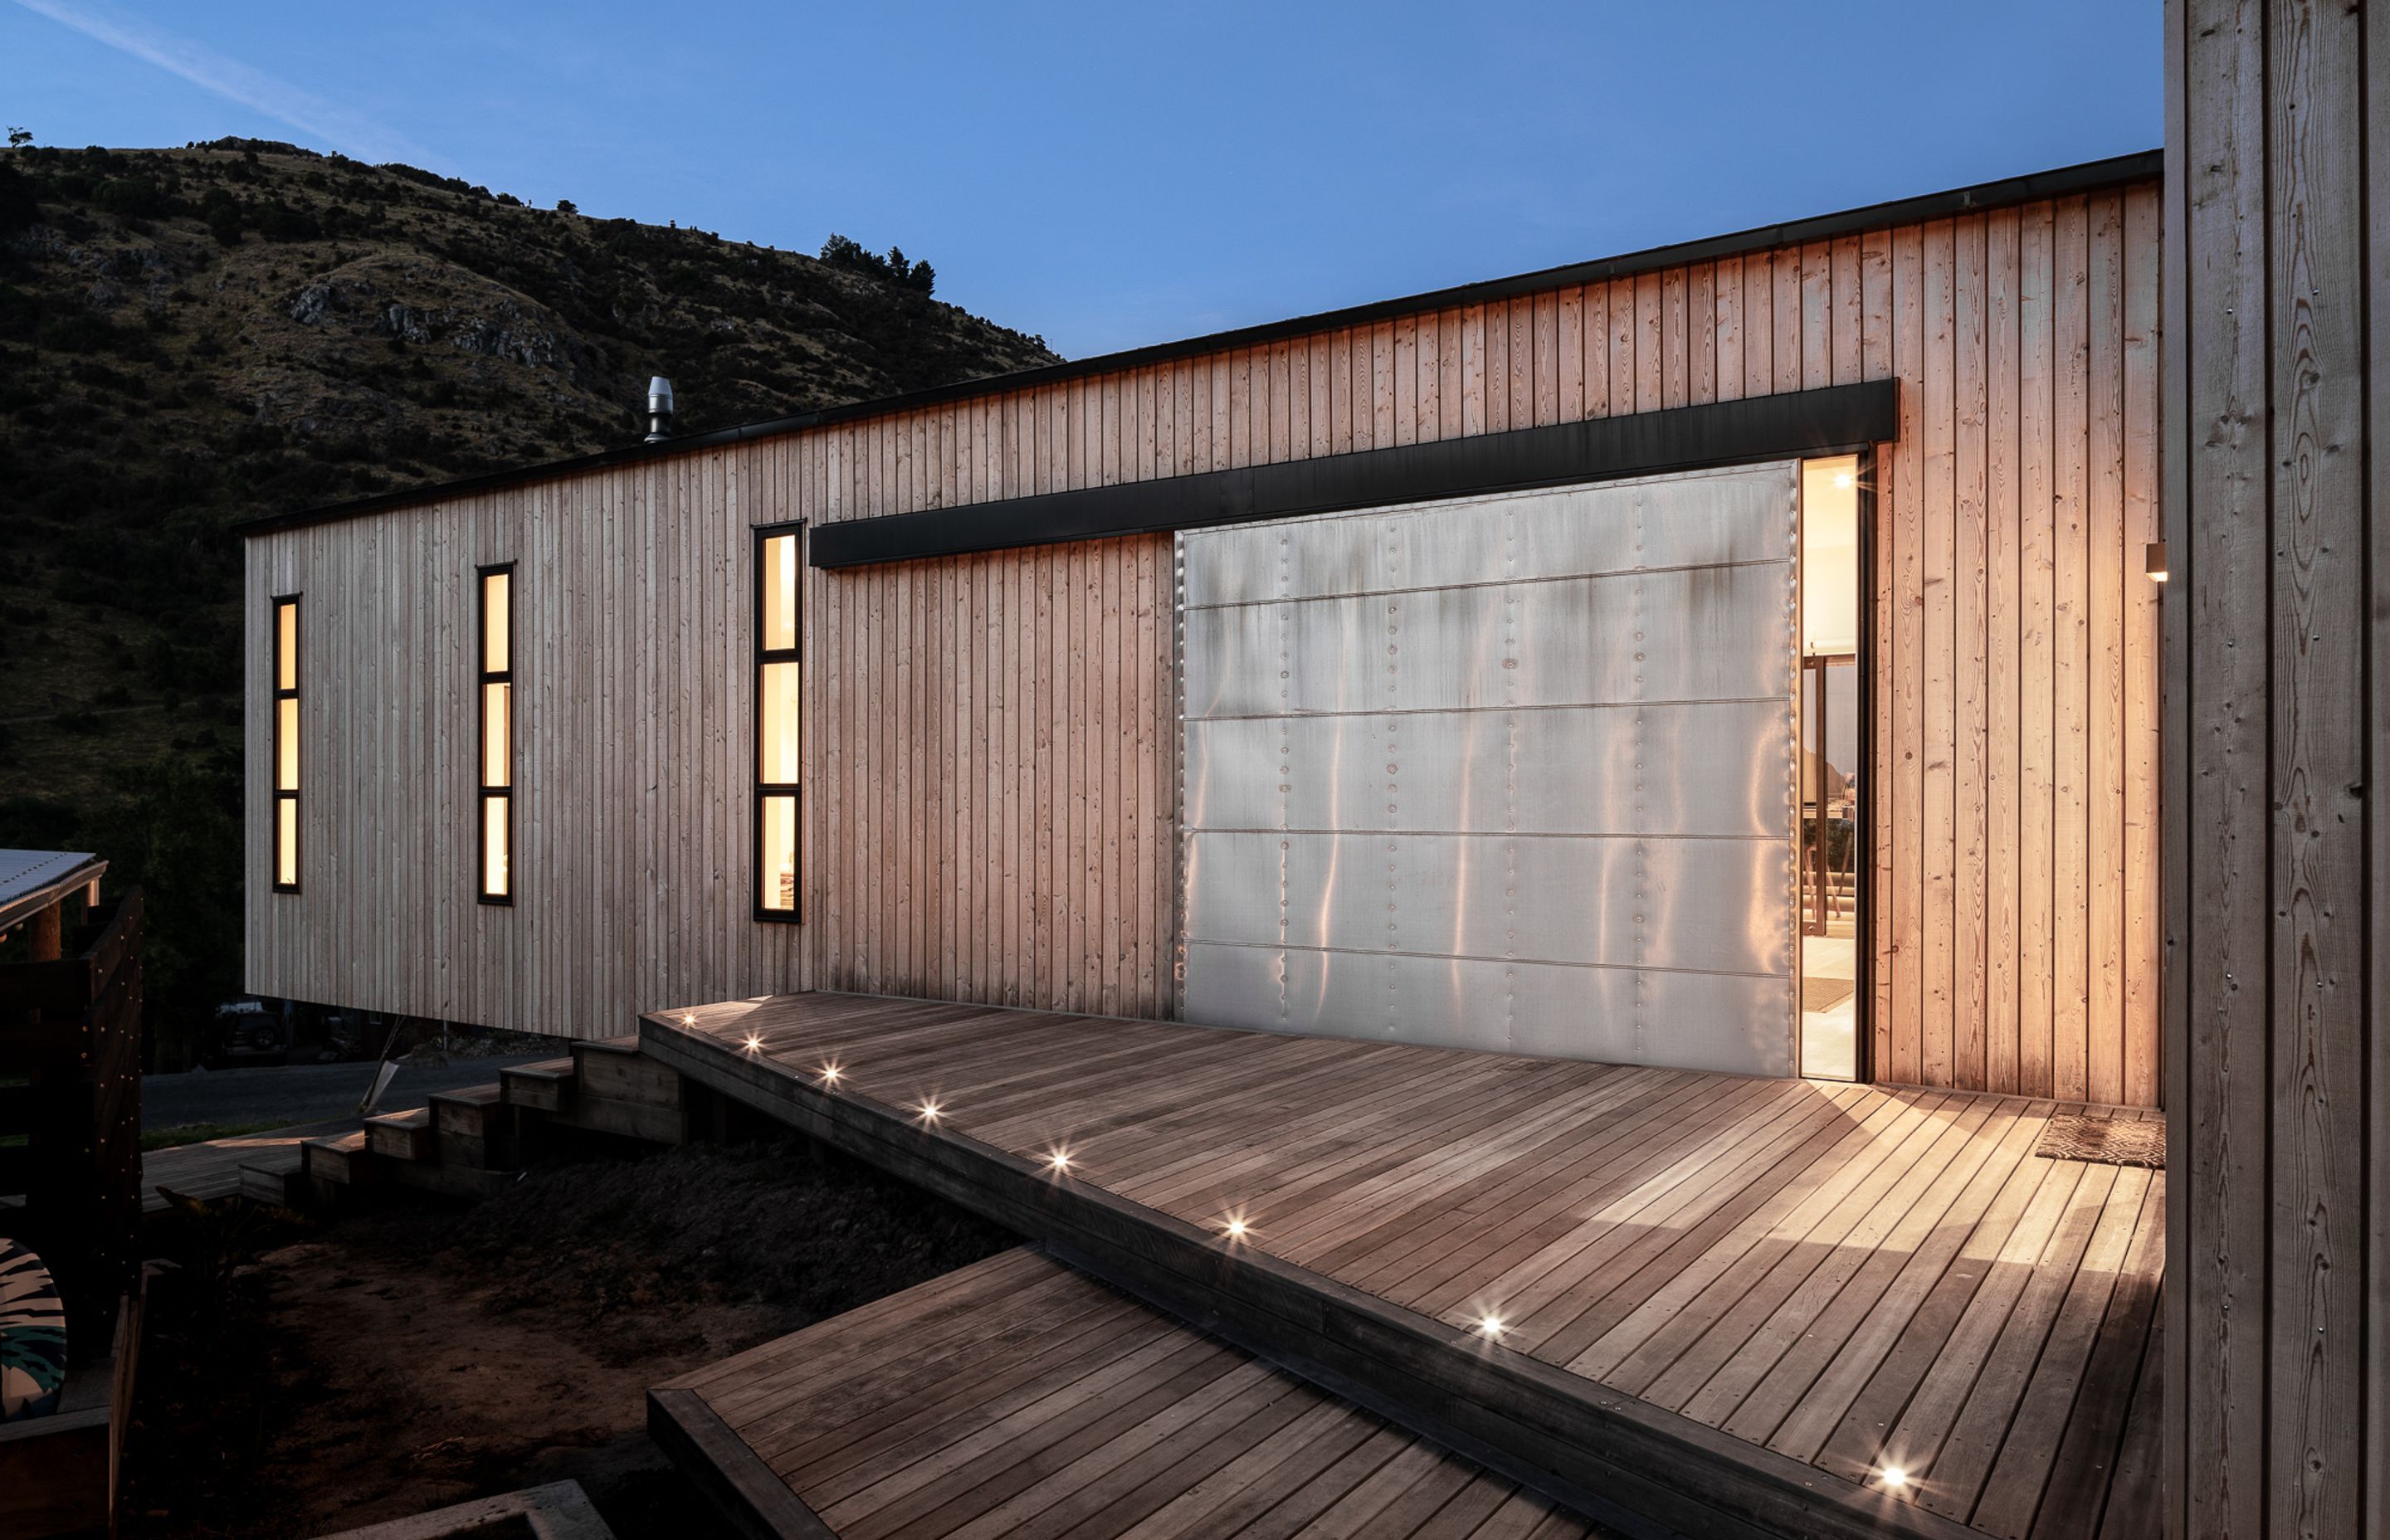 The western elevation, facing the valley, features a large industrial door that was designed by the architect and custom-built with pure zinc cladding and expressed rivets and seams.